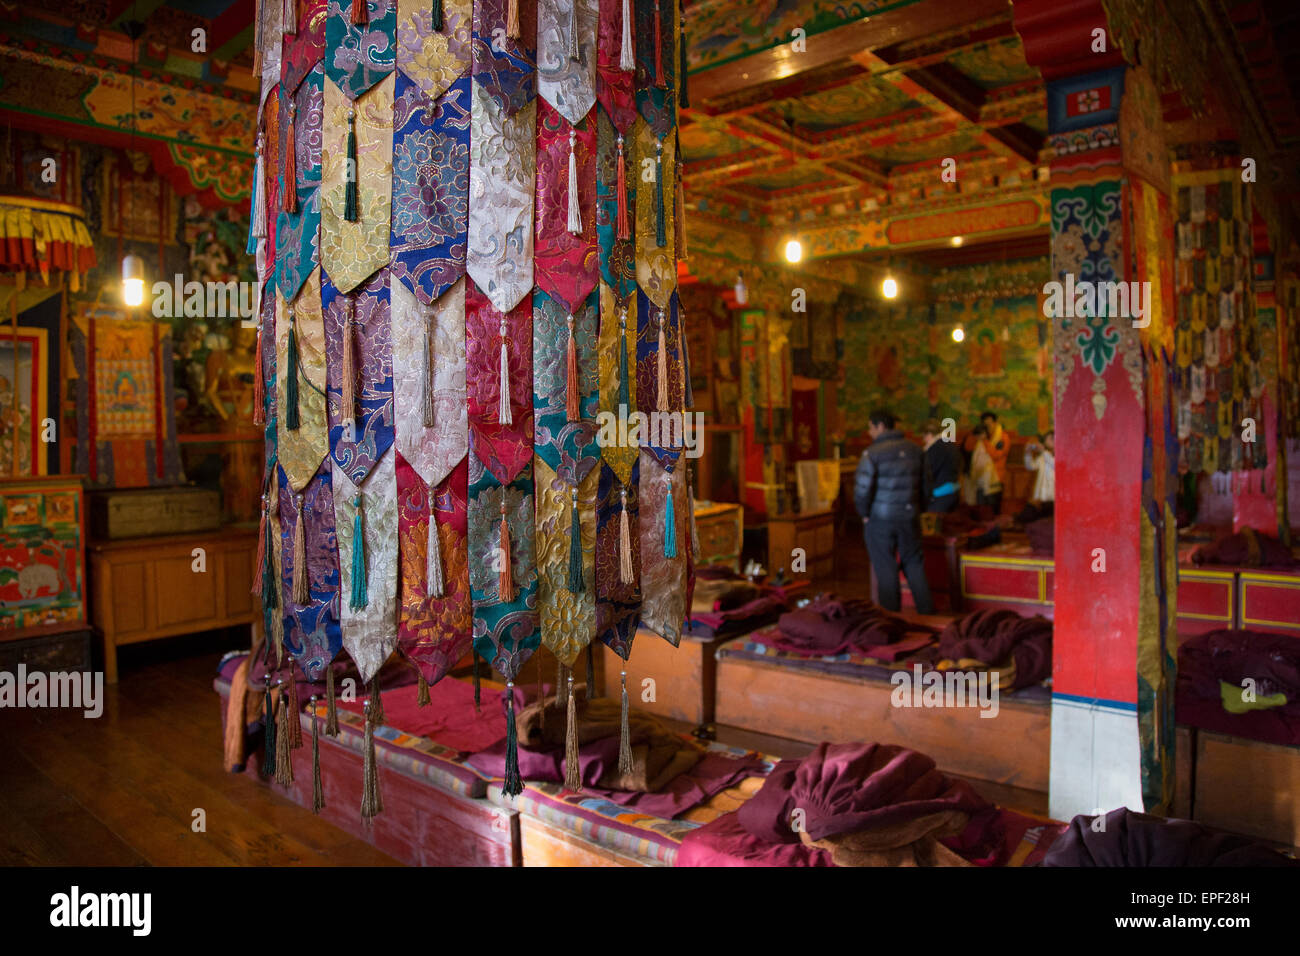 Detail of the colourful interior of the Buddhist monastery at Tengboche, in the Himalayas Nepal Stock Photo